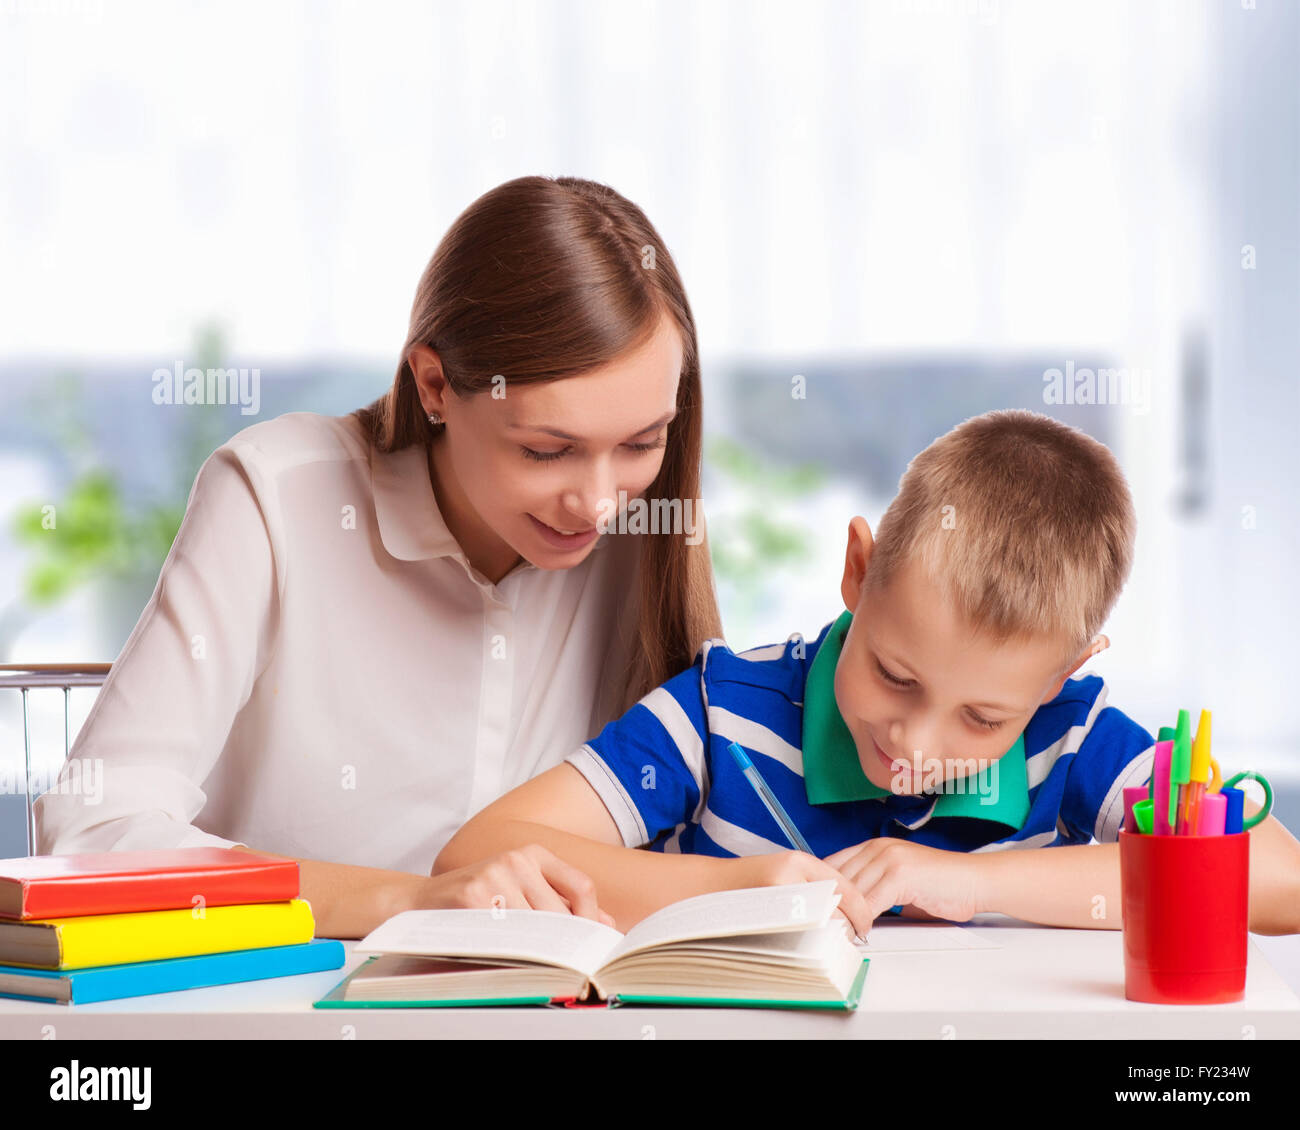 Mother helping son with Homework at table Banque D'Images